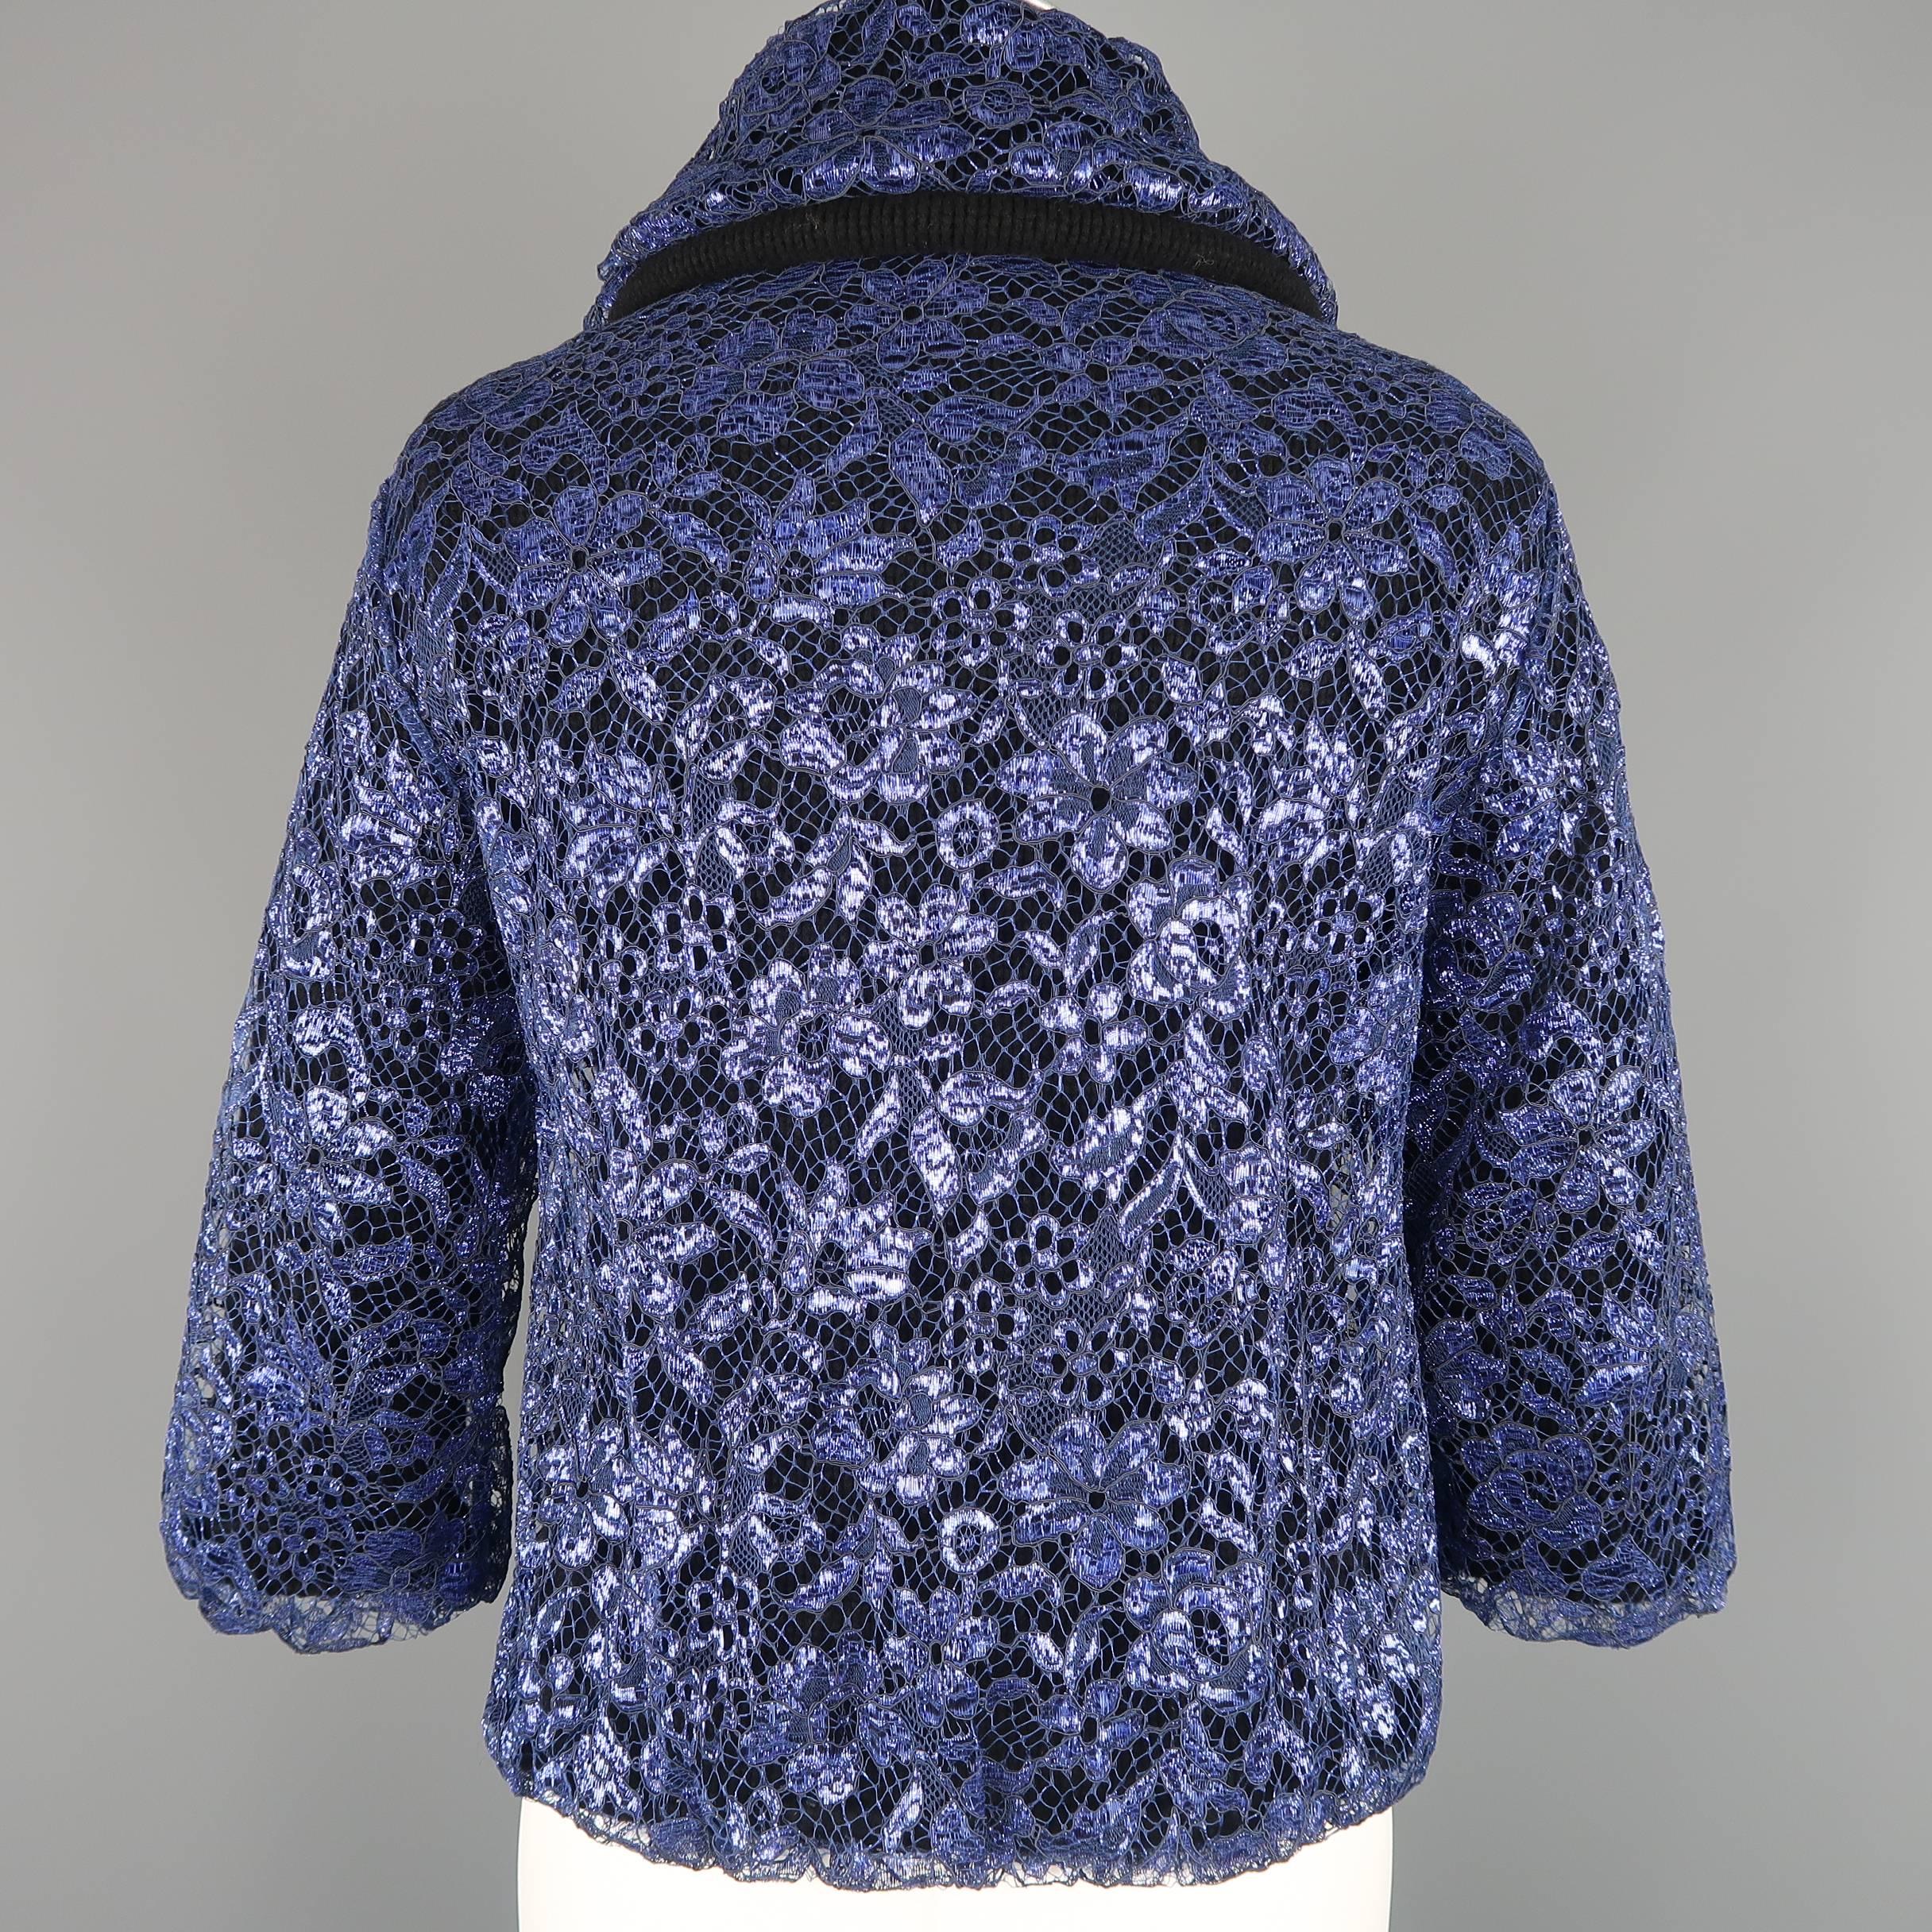 MARC JACOBS Size S Blue Metallic Lace Overlay Cashmere Jacket 2